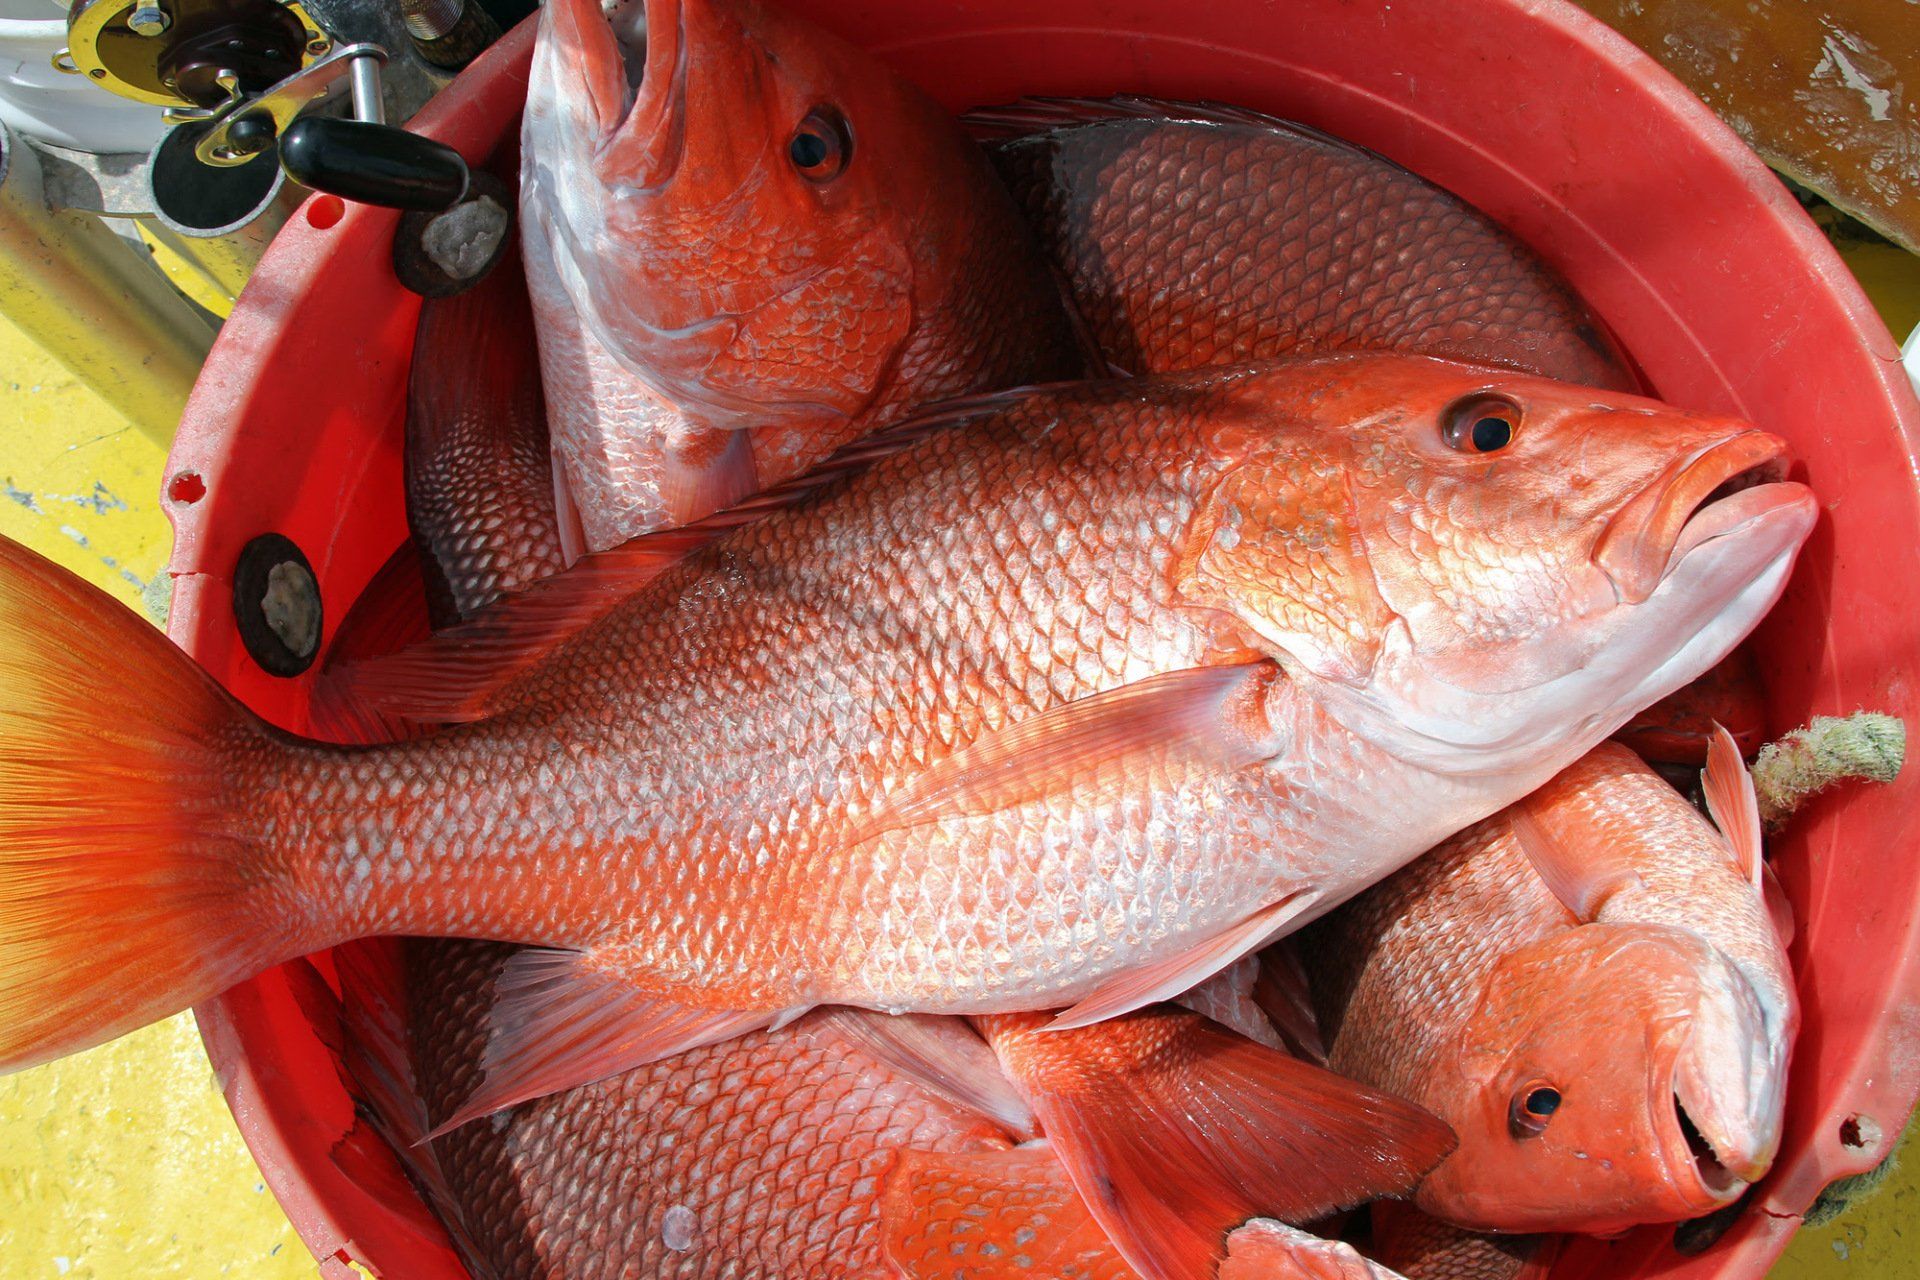 NOAA Fisheries Announces 85-Day Window for Gulf of Mexico Red Snapper For-Hire Season